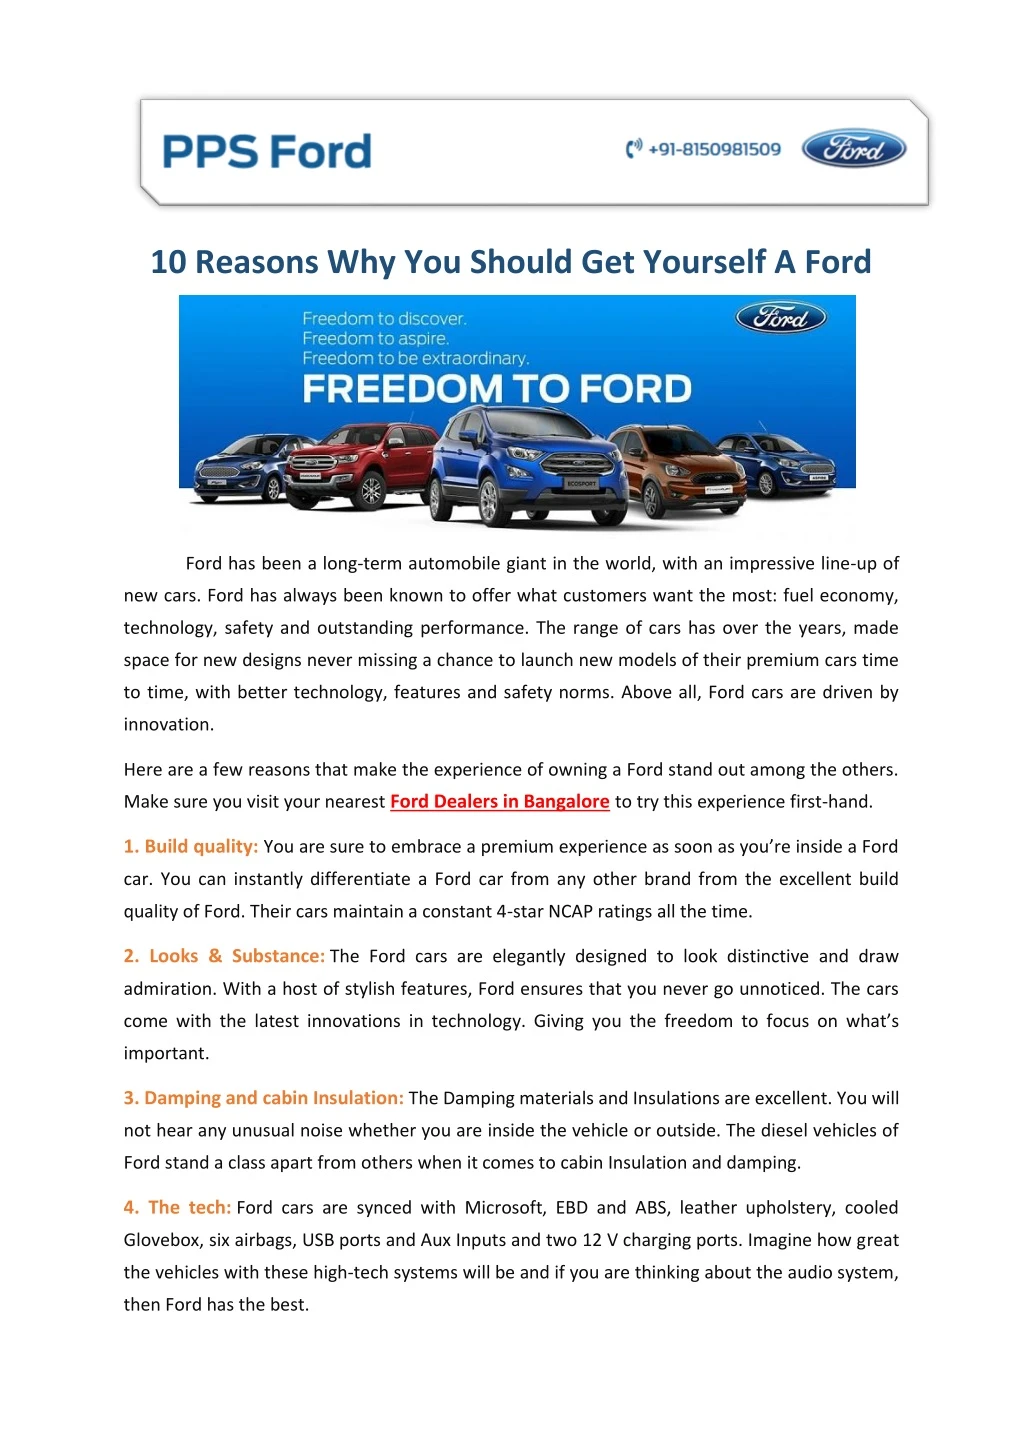 10 reasons why you should get yourself a ford